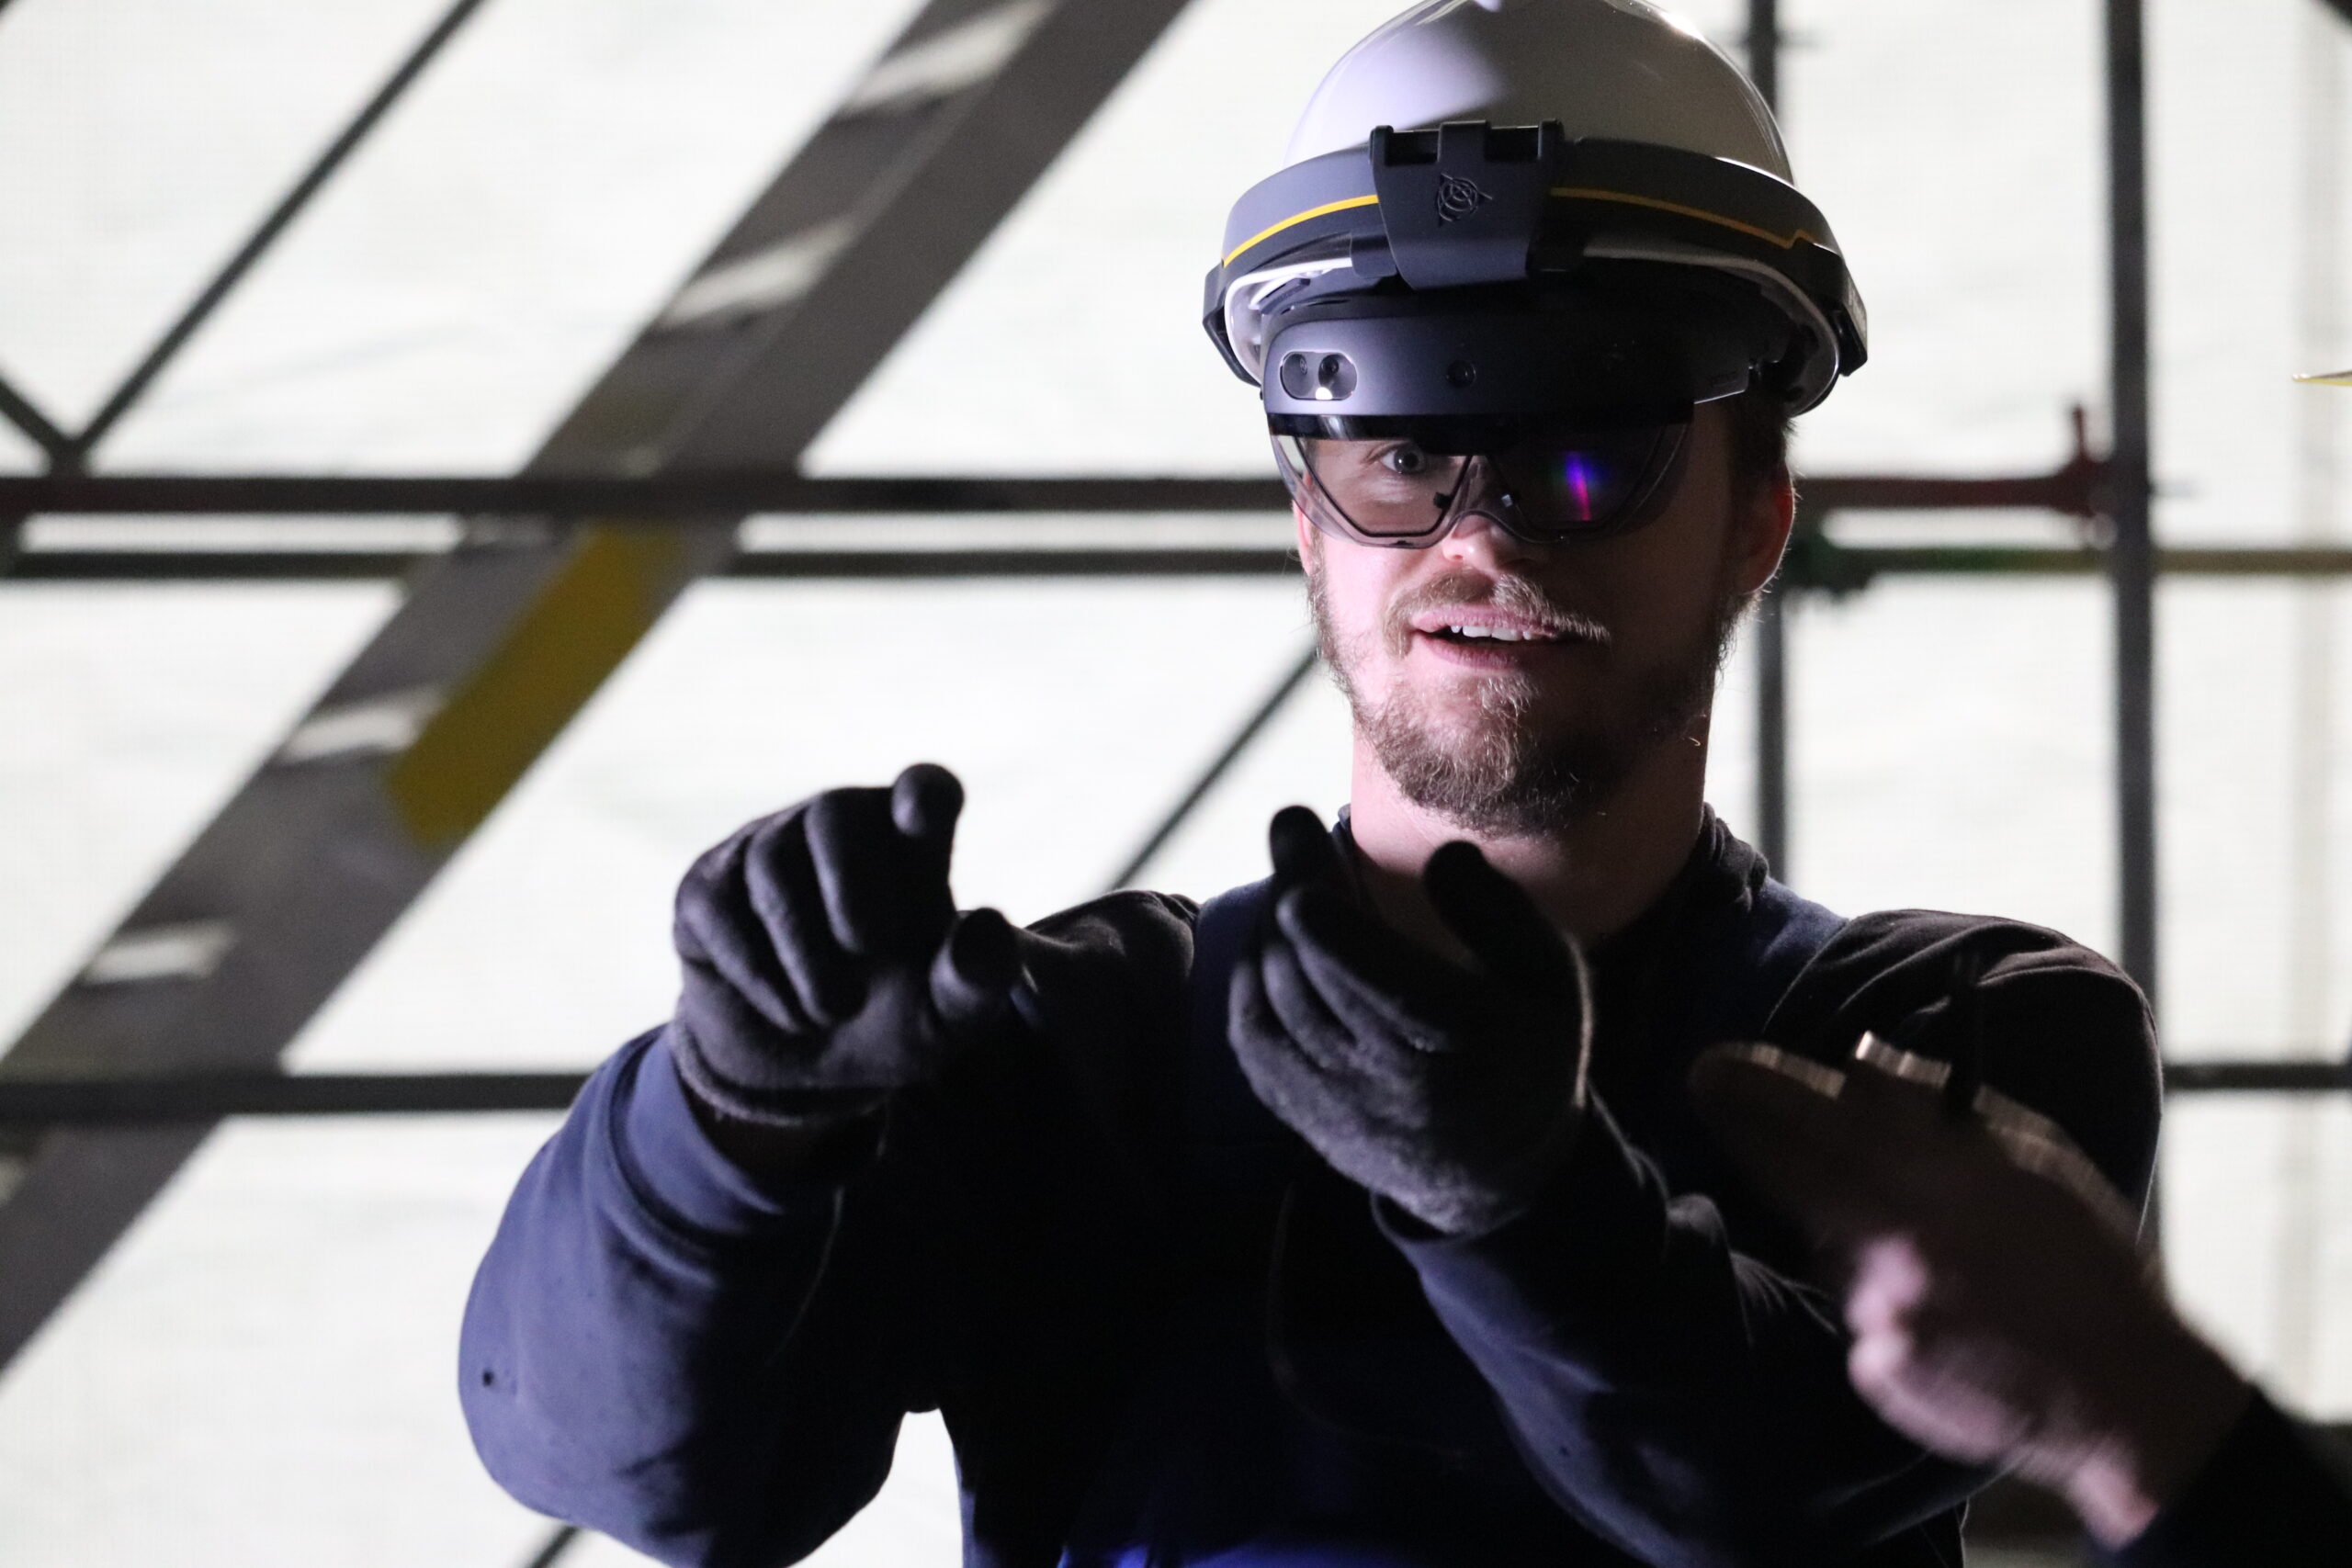 thyssenkrupp Marine Systems Uses AR in Manufacturing